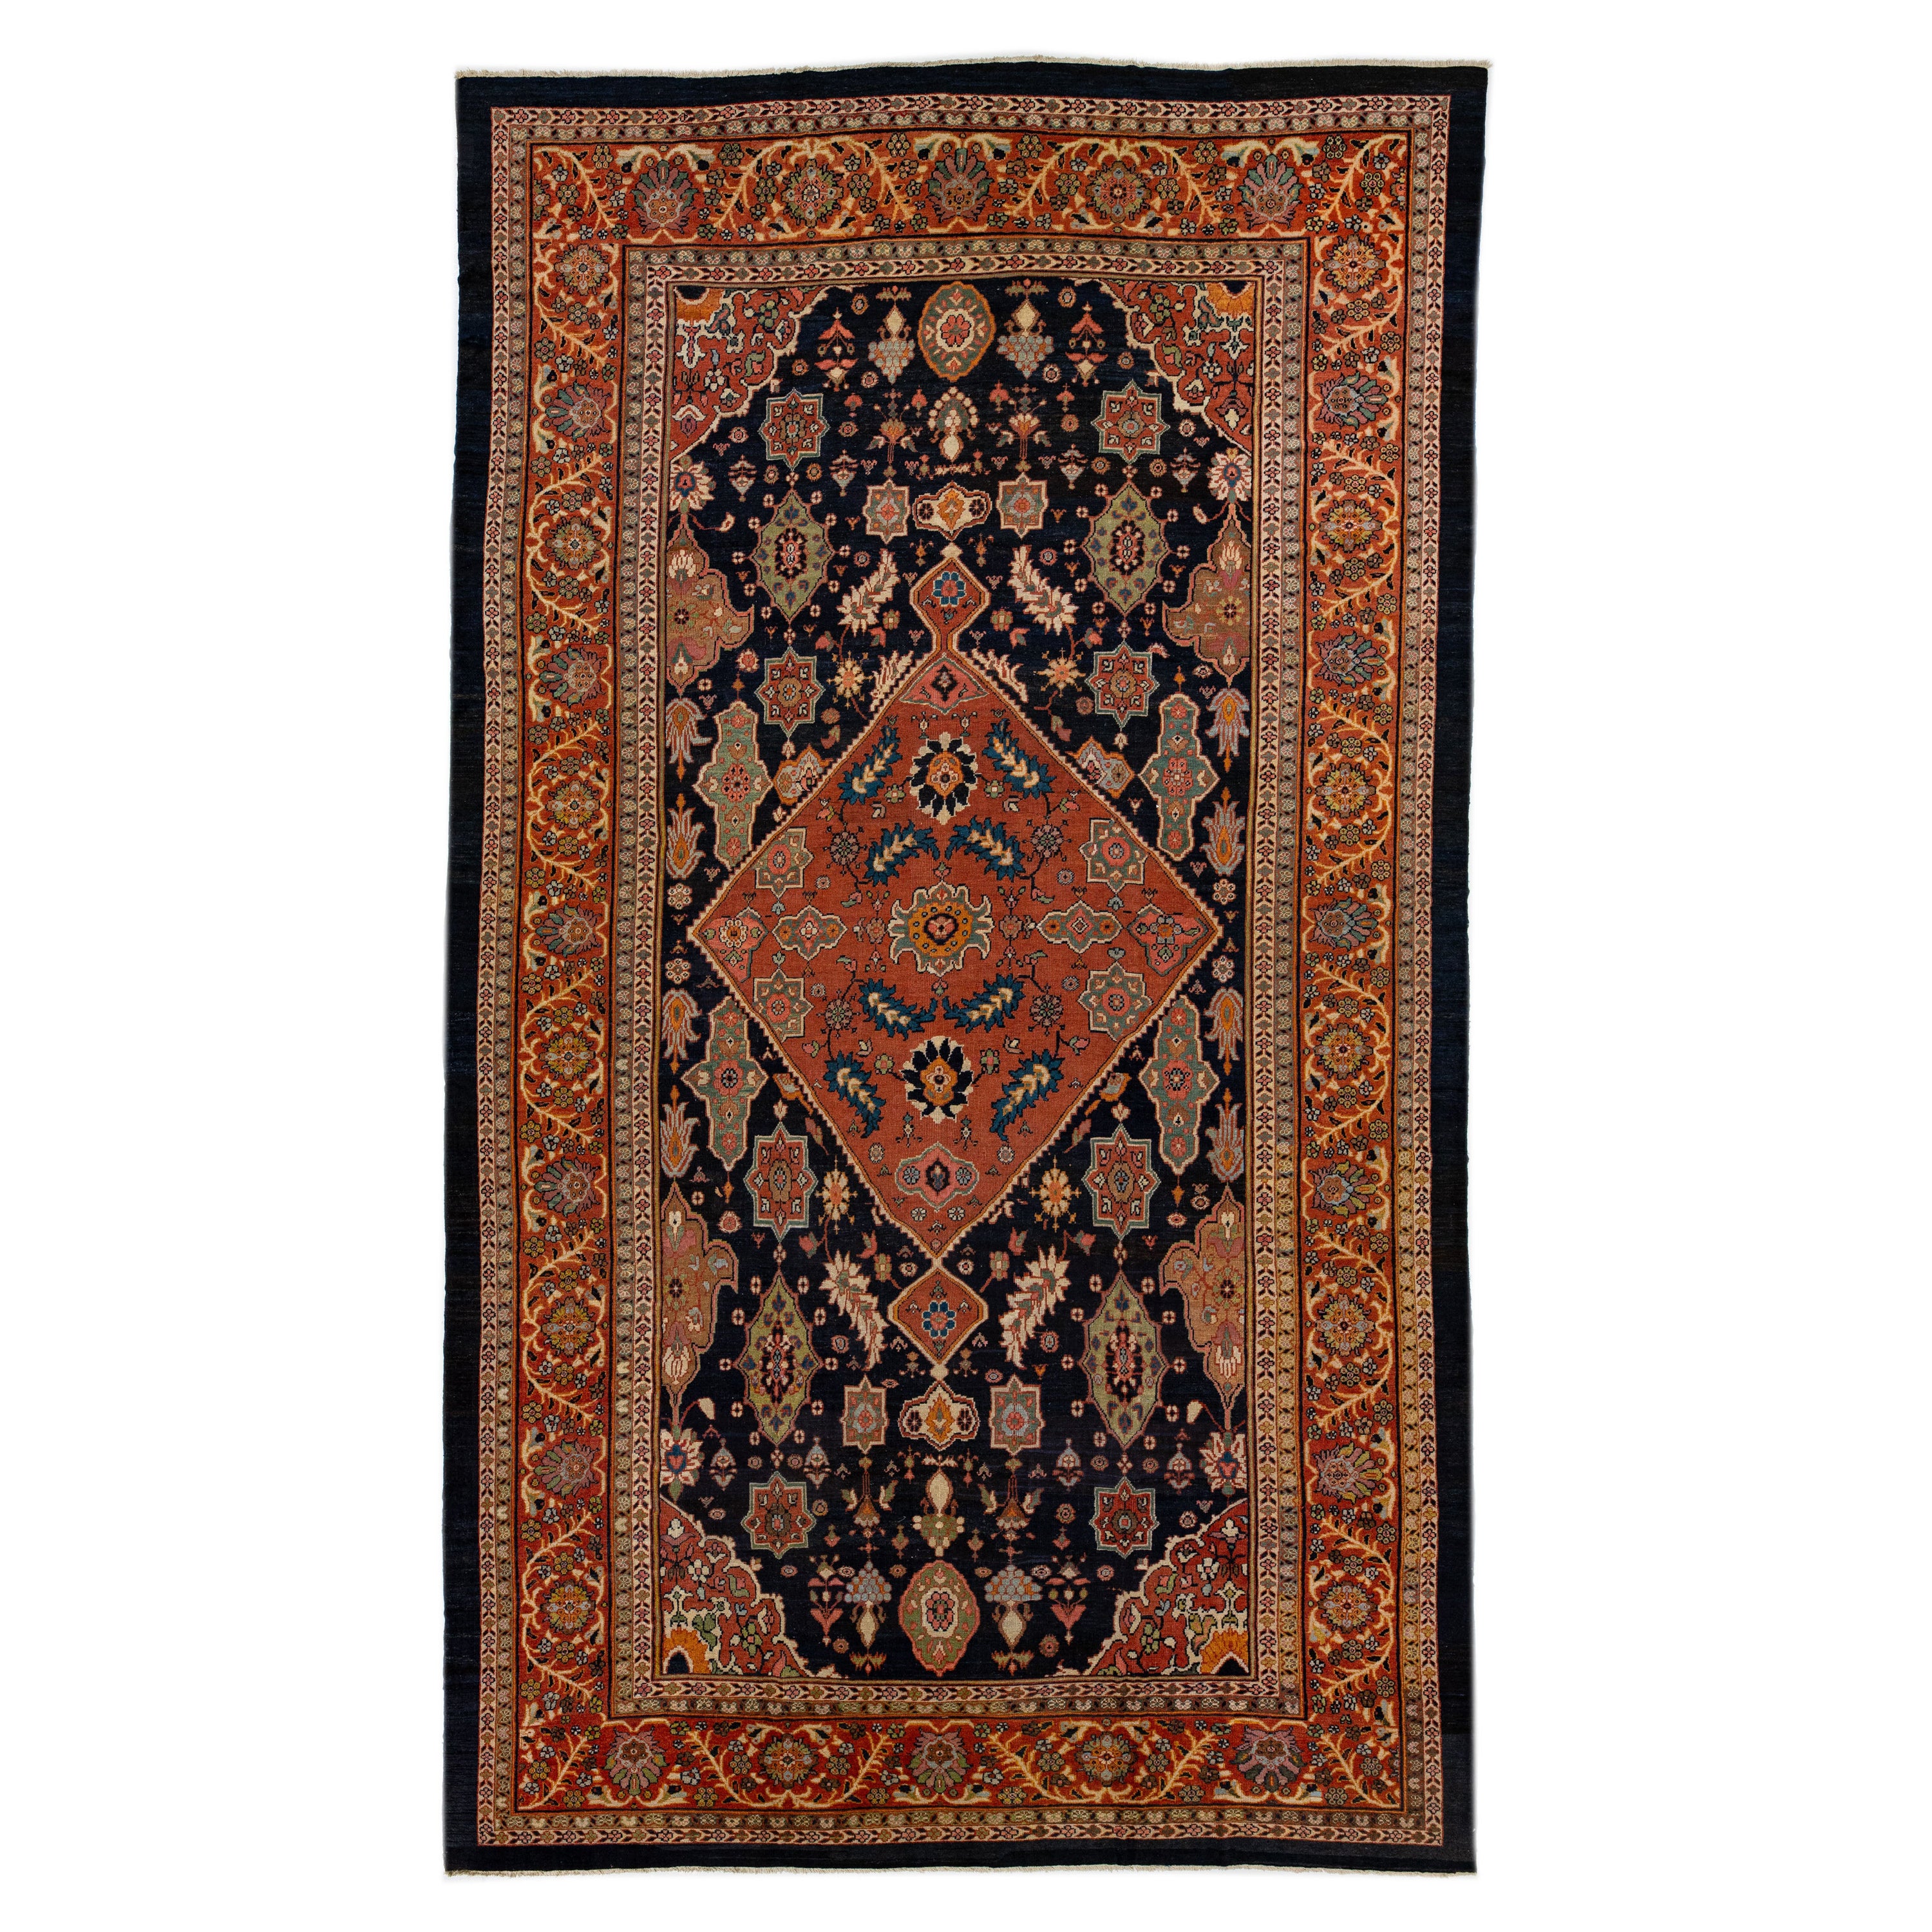 1880s Antique Persian Mahal Wool Rug with Dark Blue Field